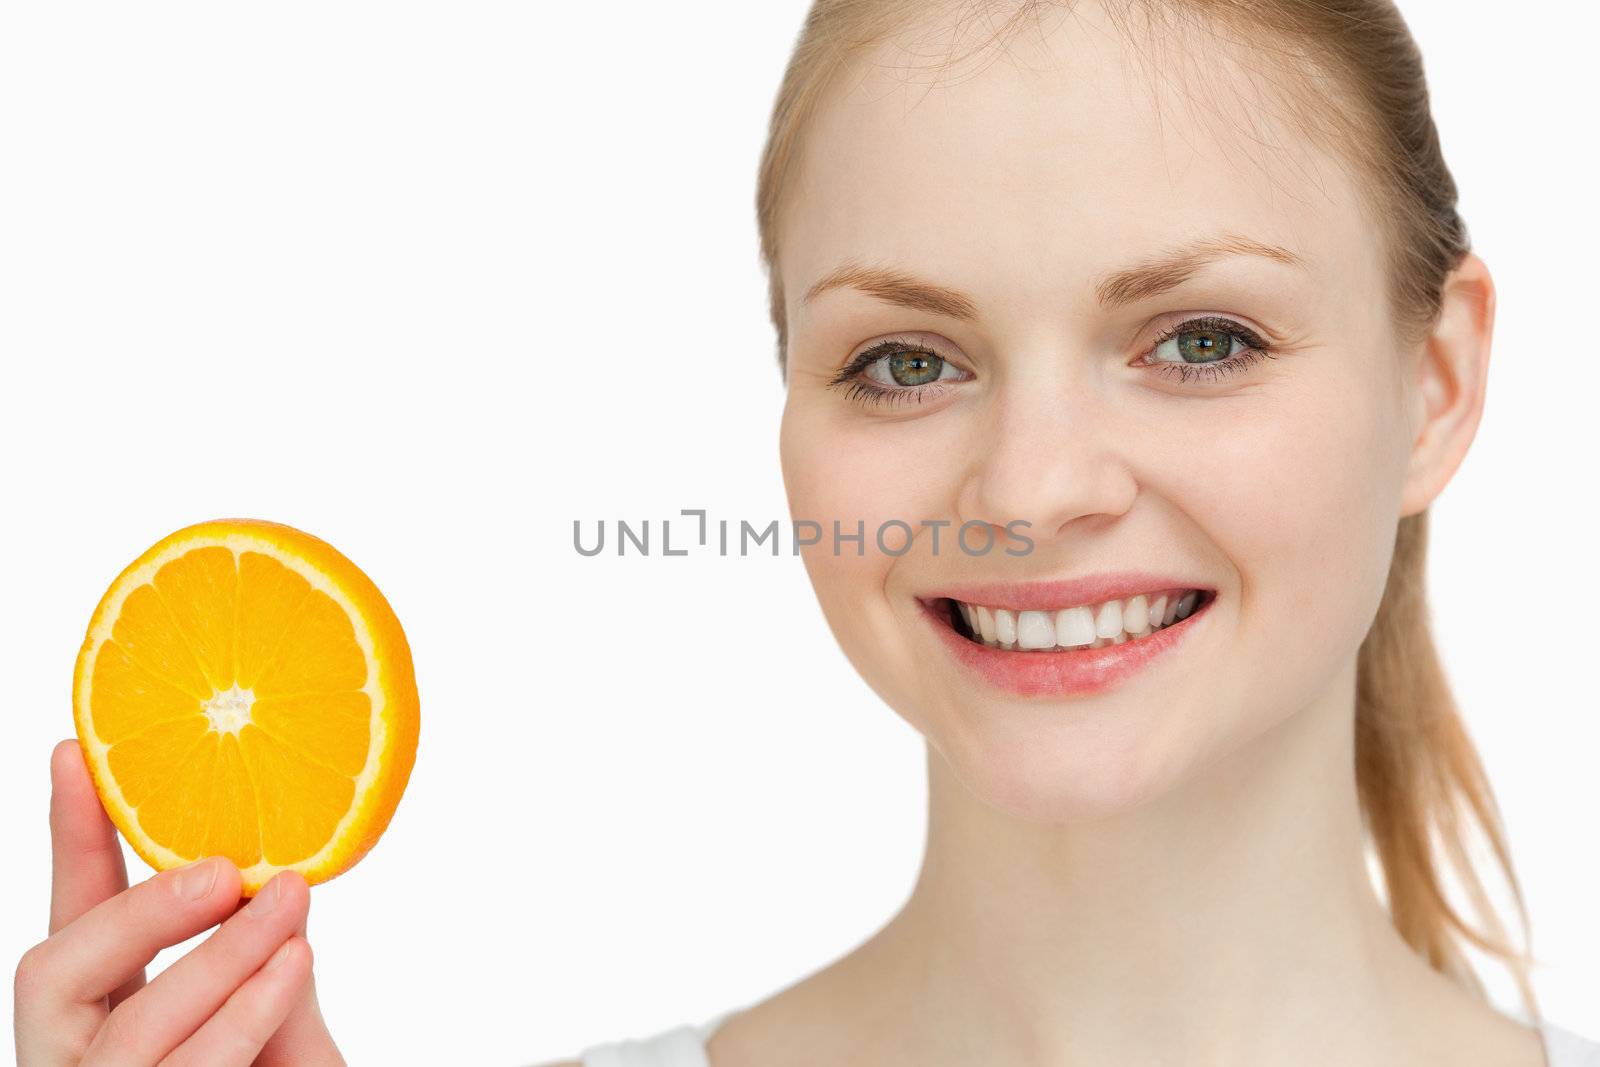 Smiling woman presenting an orange slice against white background